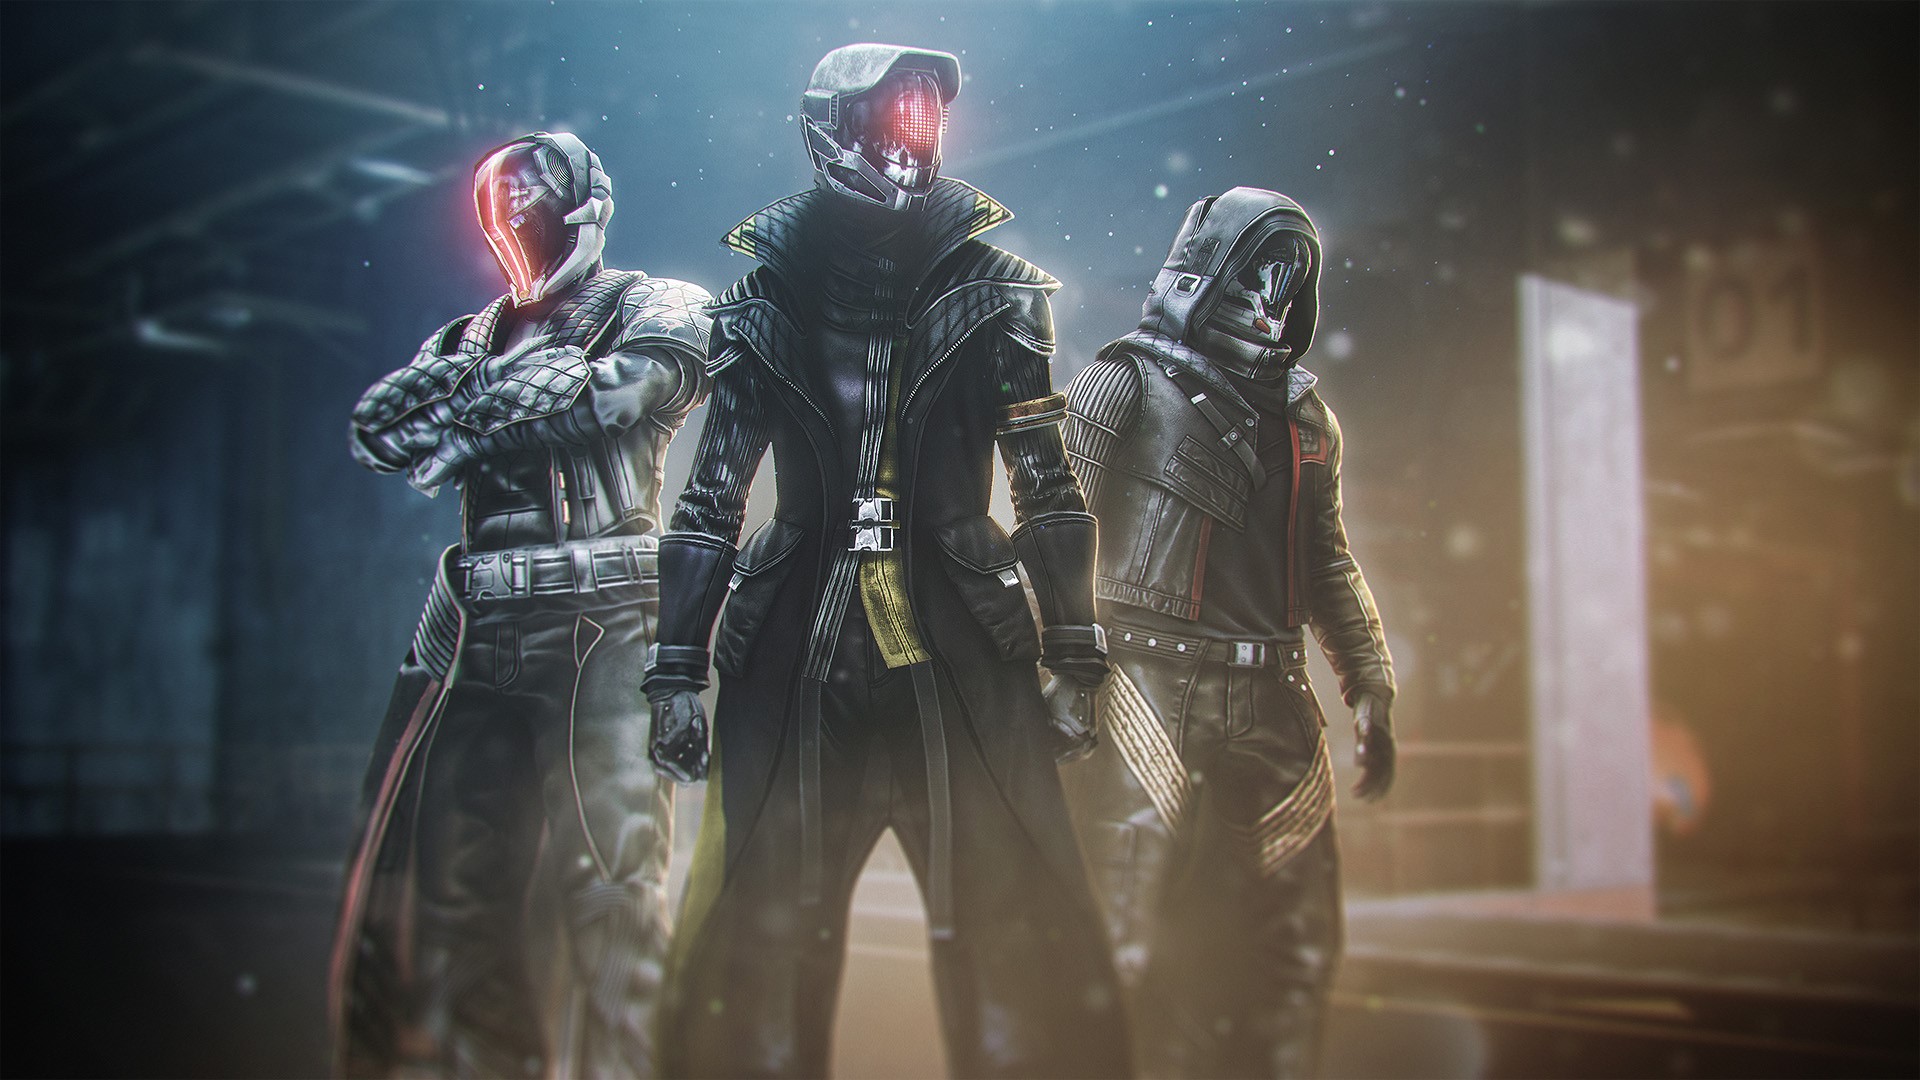  Destiny 2 fashionistas will finally be rewarded for their sense of style earlier than planned 